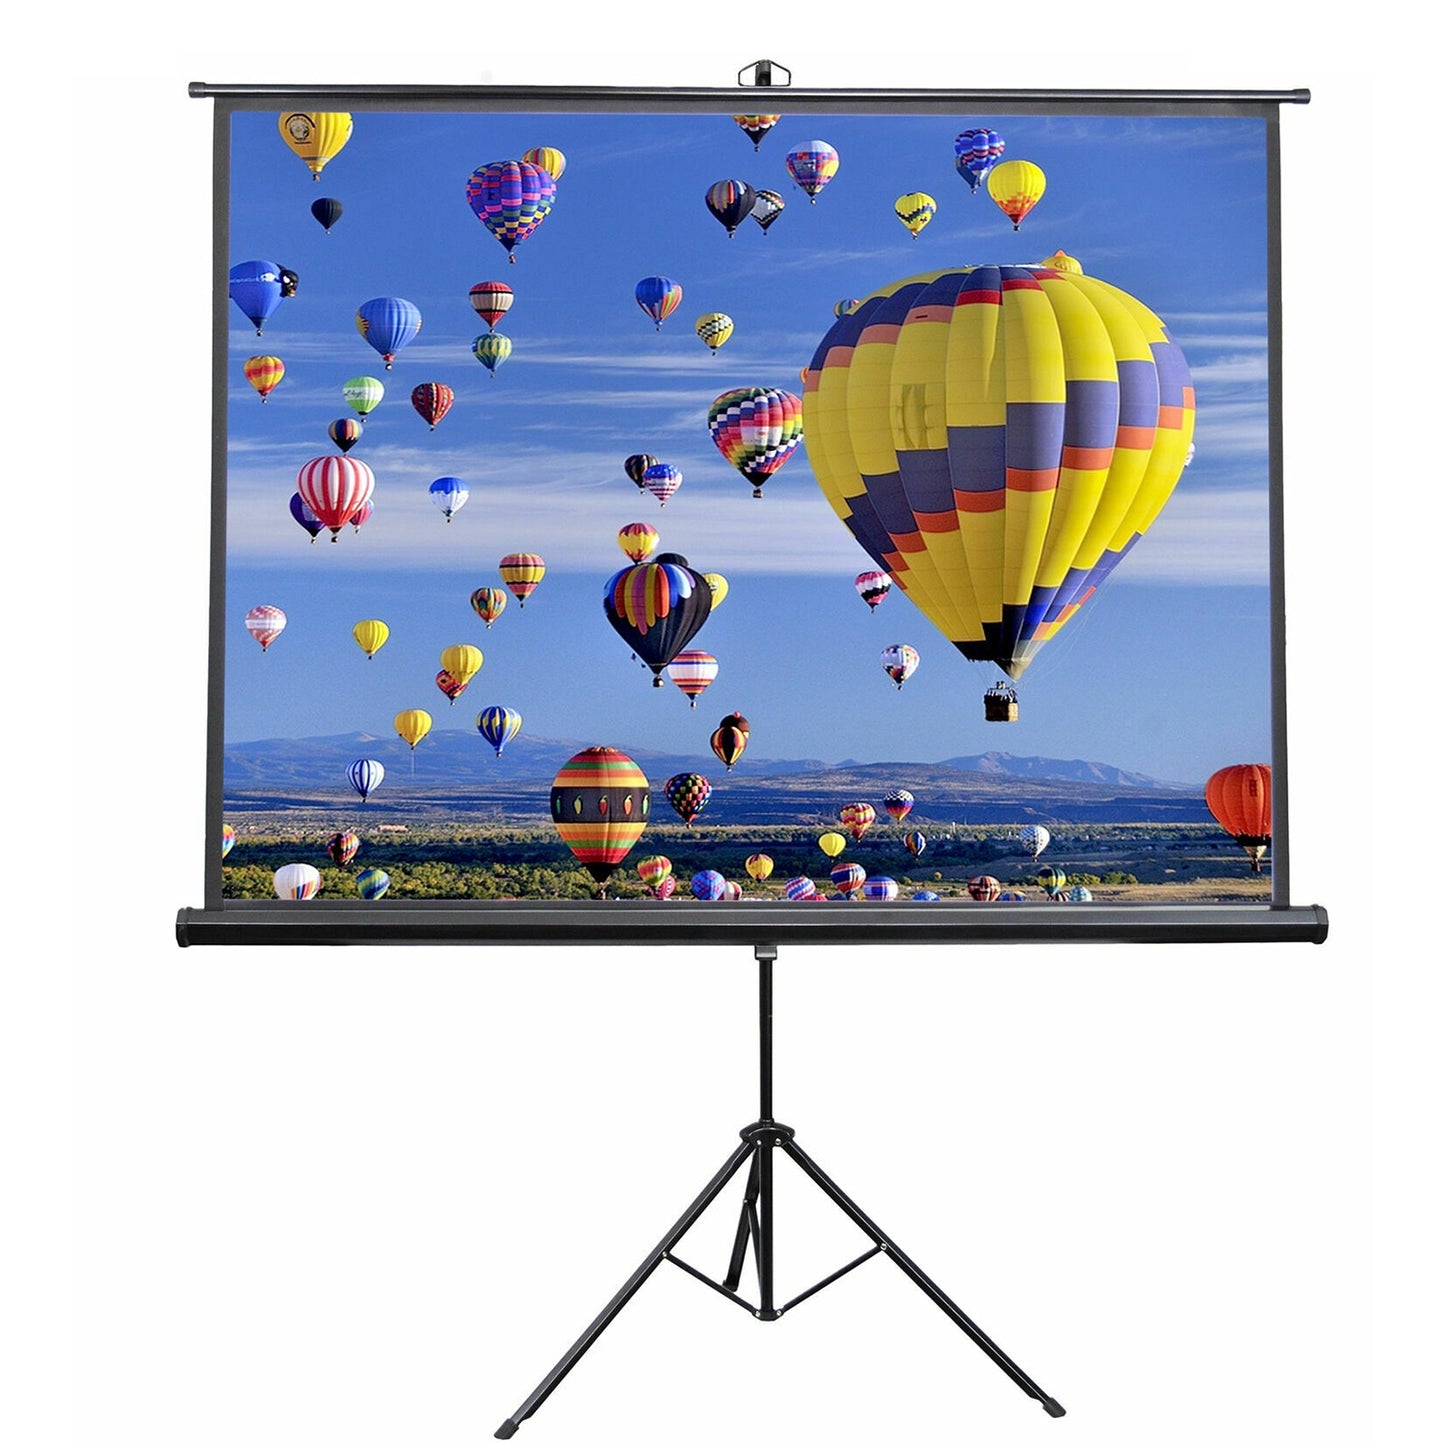 5 Core 72 inch Projection Screen 4:3 Foldable and Portable Anti-Crease Indoor Outdoor Projection Screen for Home, Party, Office, Classroom- SCREEN TR 72 (4:3)